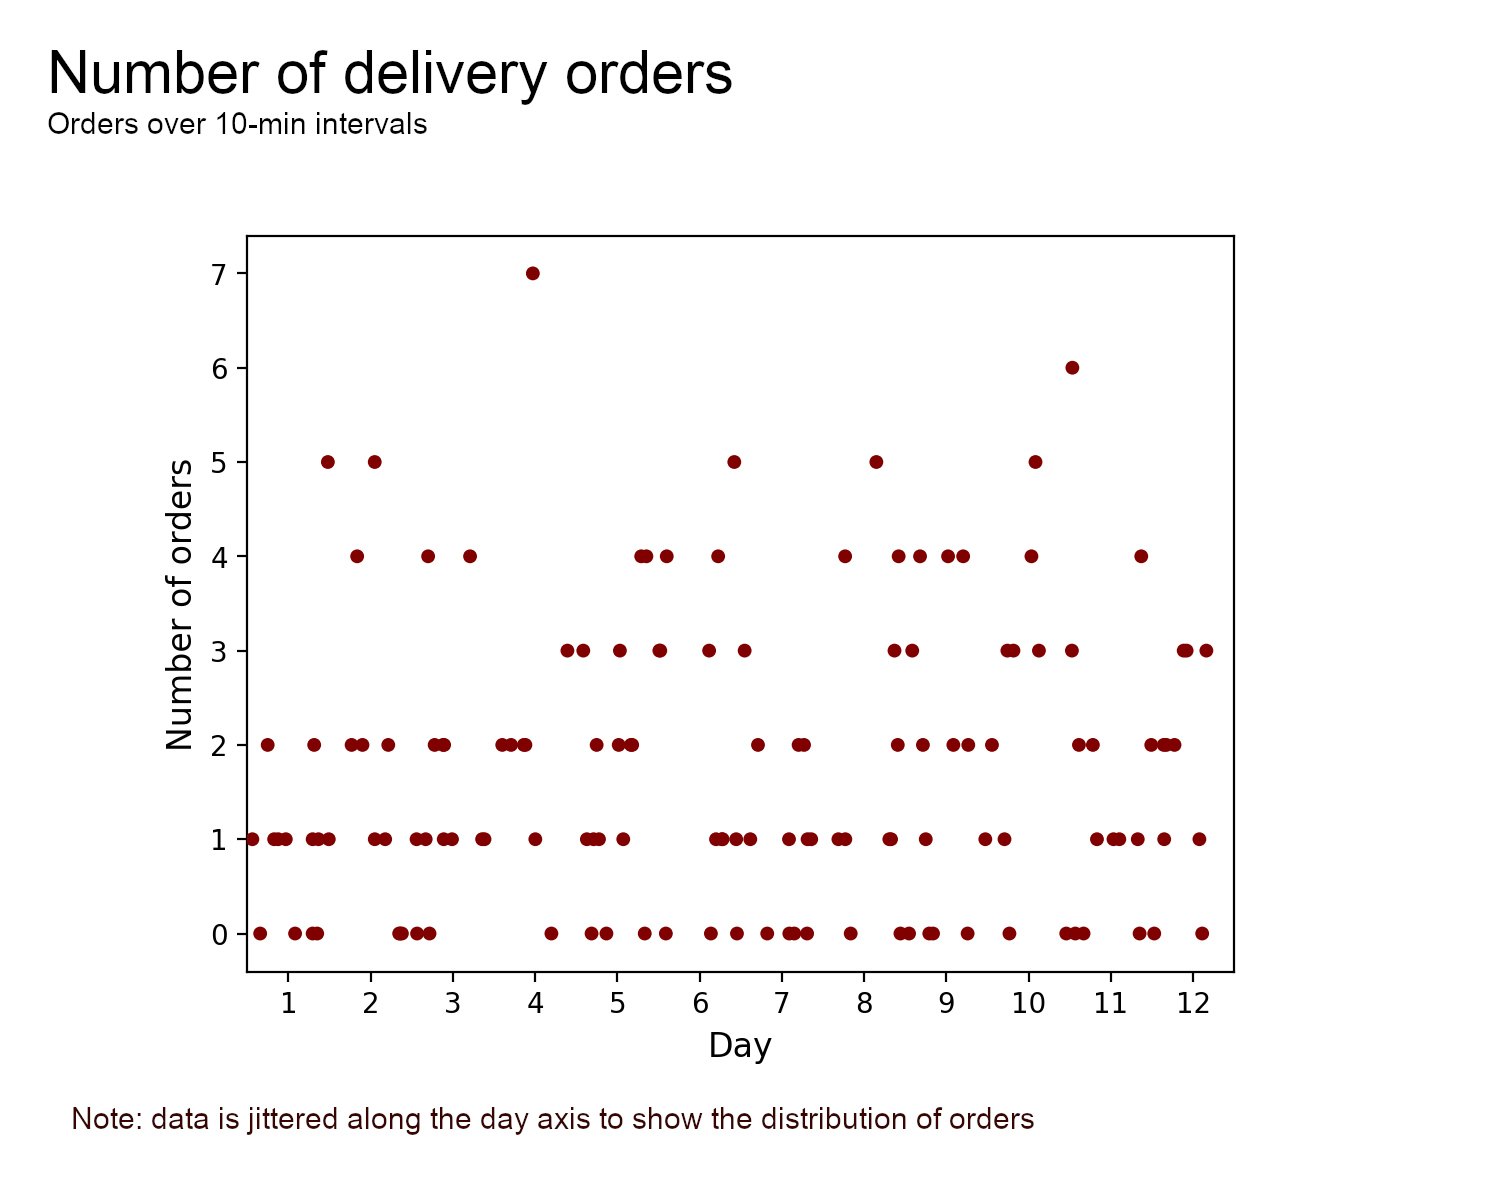 Distribution of orders